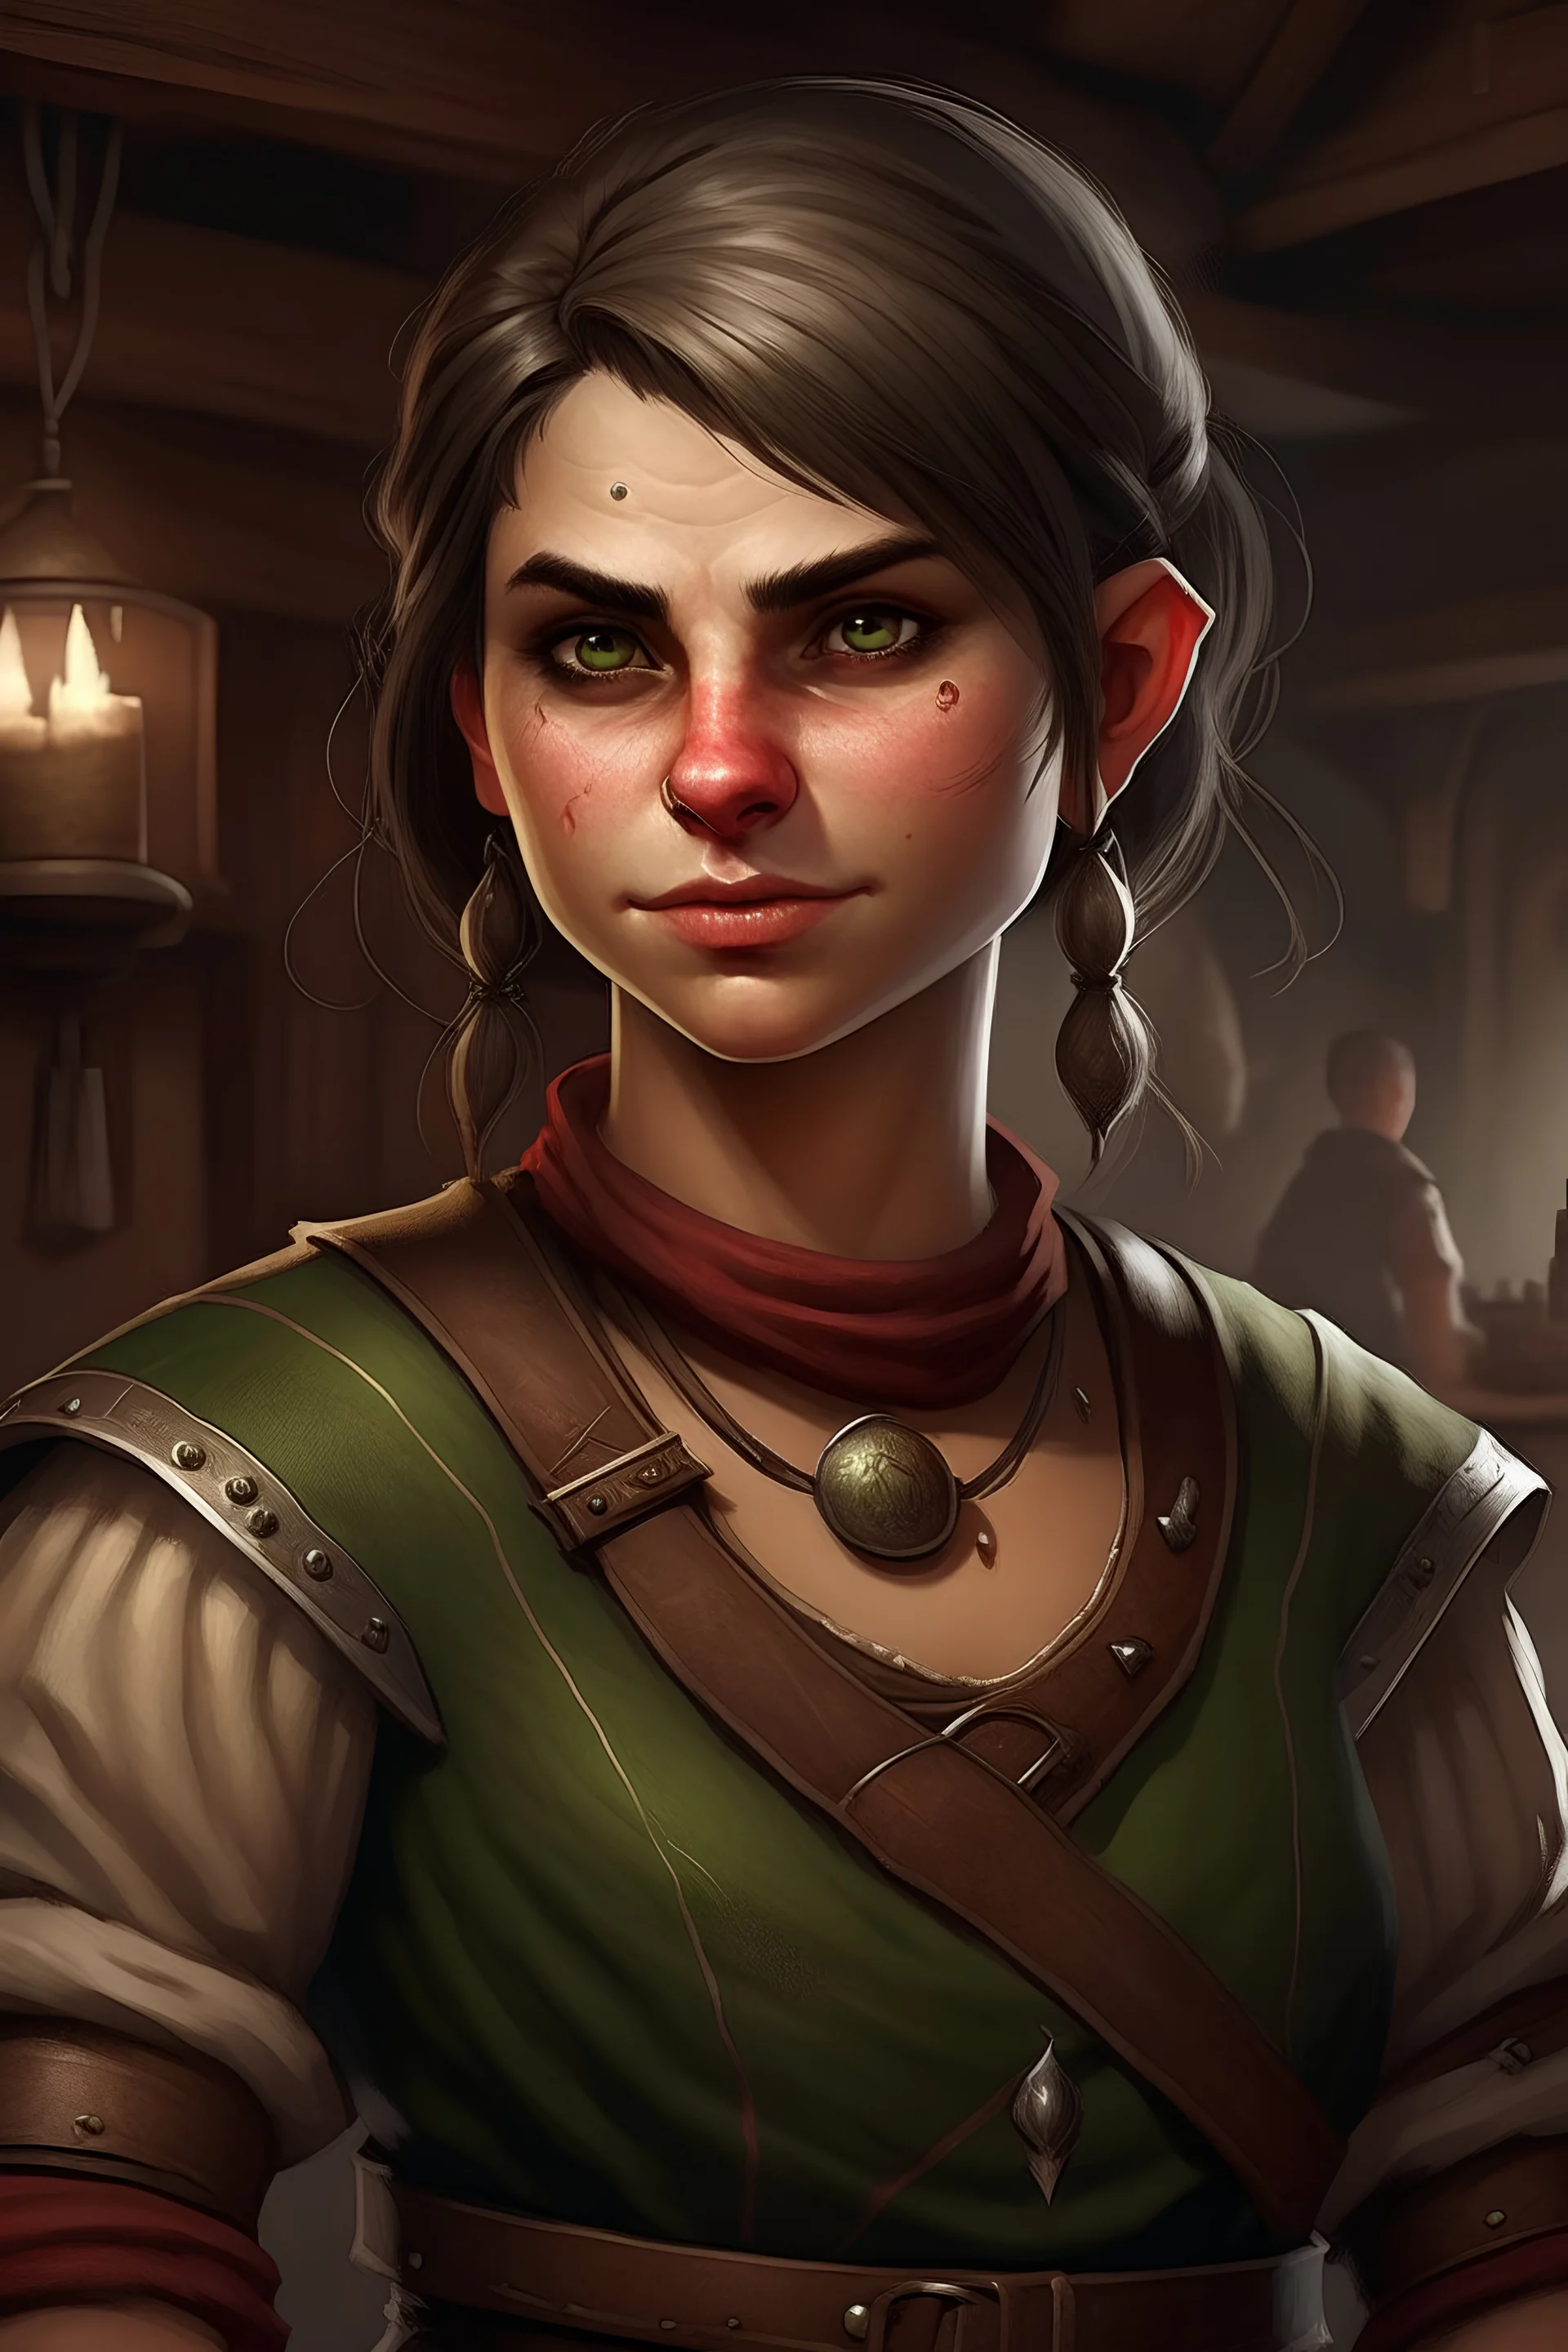 Dungeons and dragons orc young woman. She has orc skin. She is kind. She is handsome. She has nice eyes. She has short hair. She is strong. She is in a tavern. She has broad shoulders. She has a large jaw. She wears casual peasant clothes. Realistic style